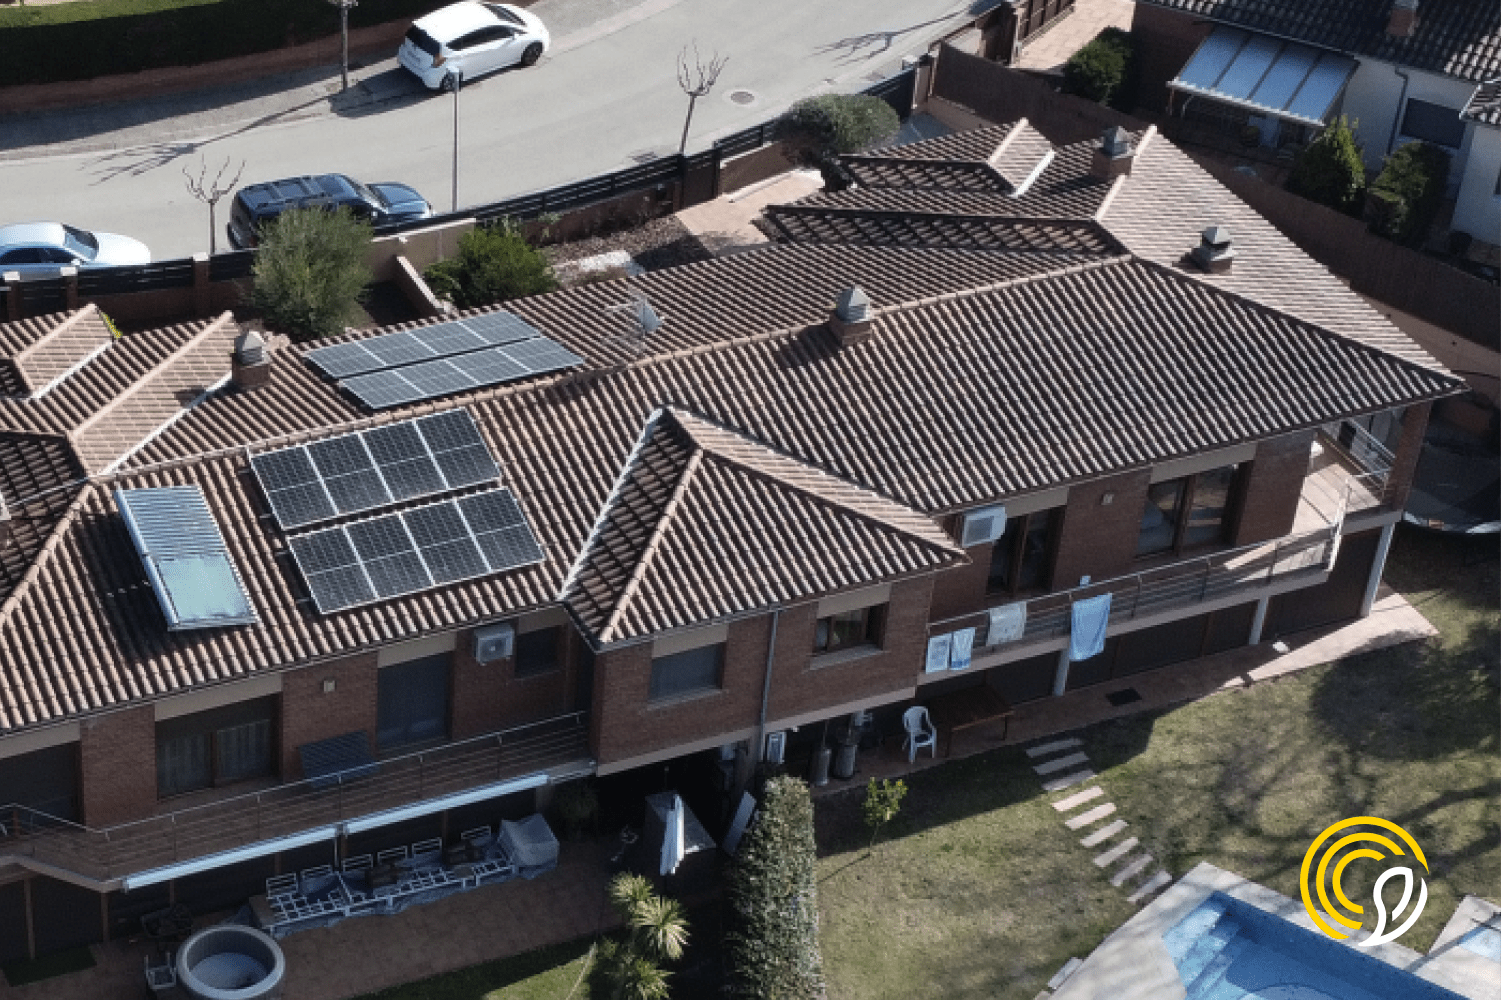 How to clean solar panels? Details and recommendations